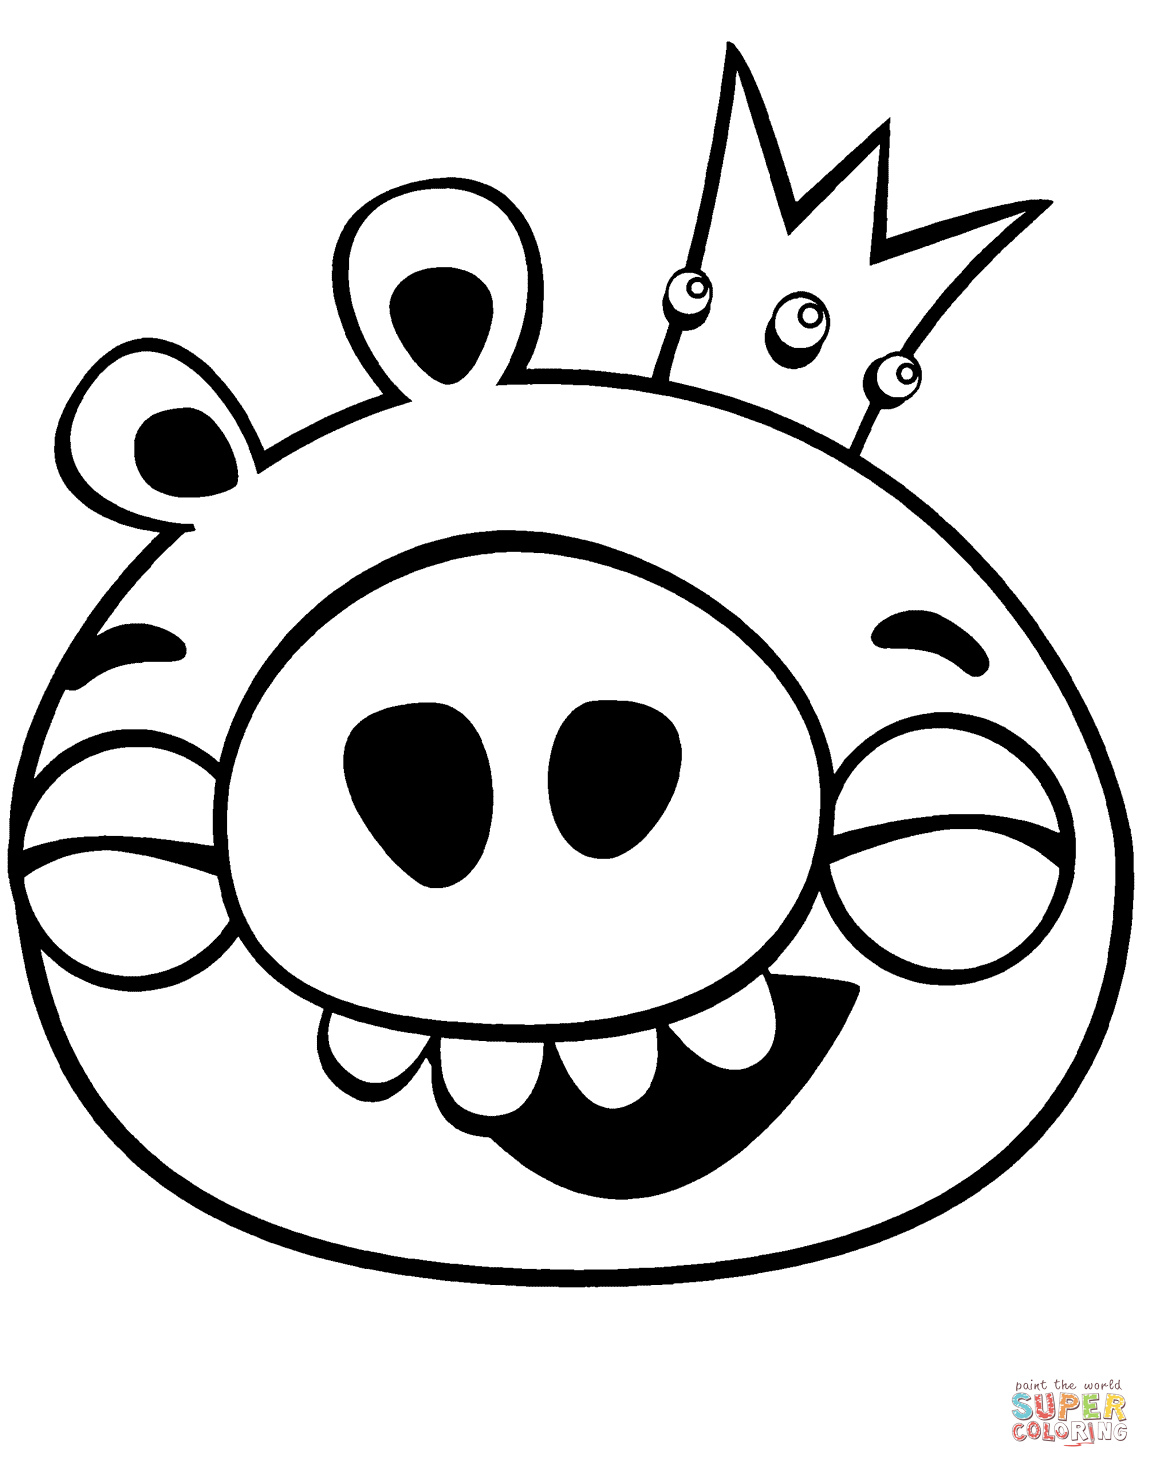 Teacup Coloring Pages To Print Pig In A Teacup Coloring Pages Angry Birds King Peppa Free For